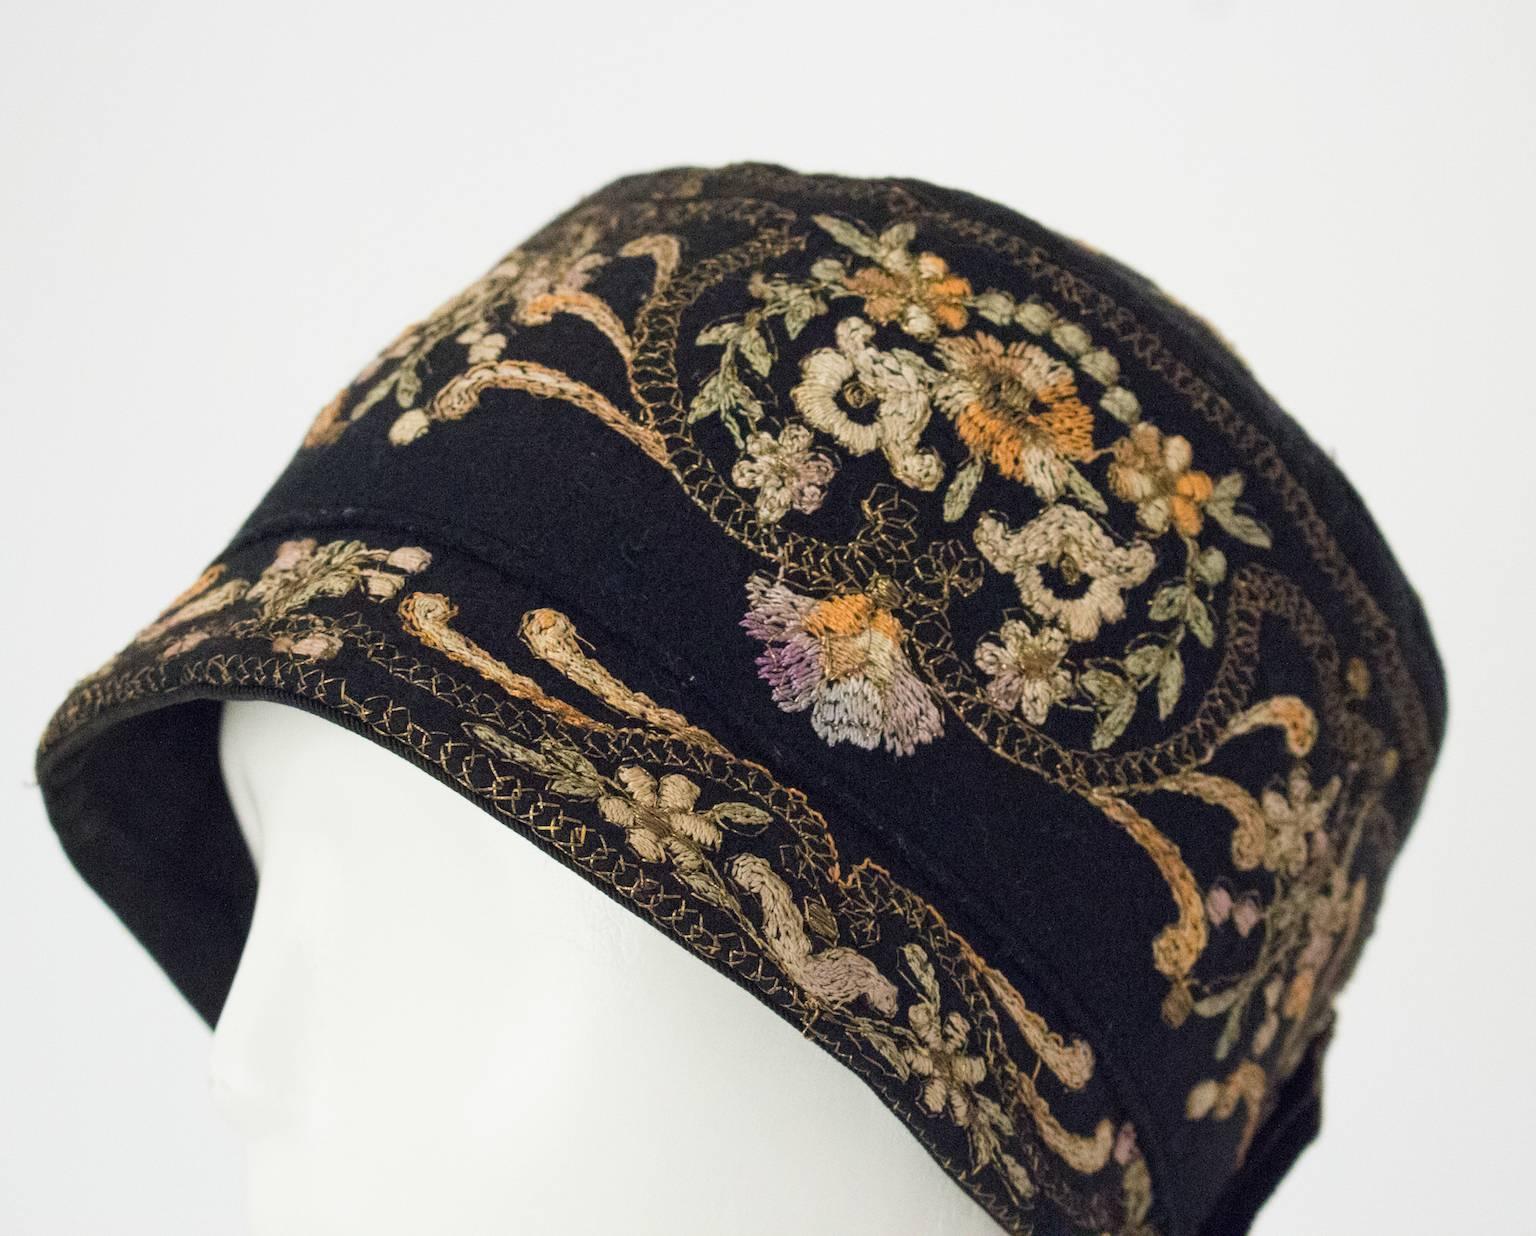 1920s black cloche with gold and silk embroidery. Wool felt. 21" circumference.